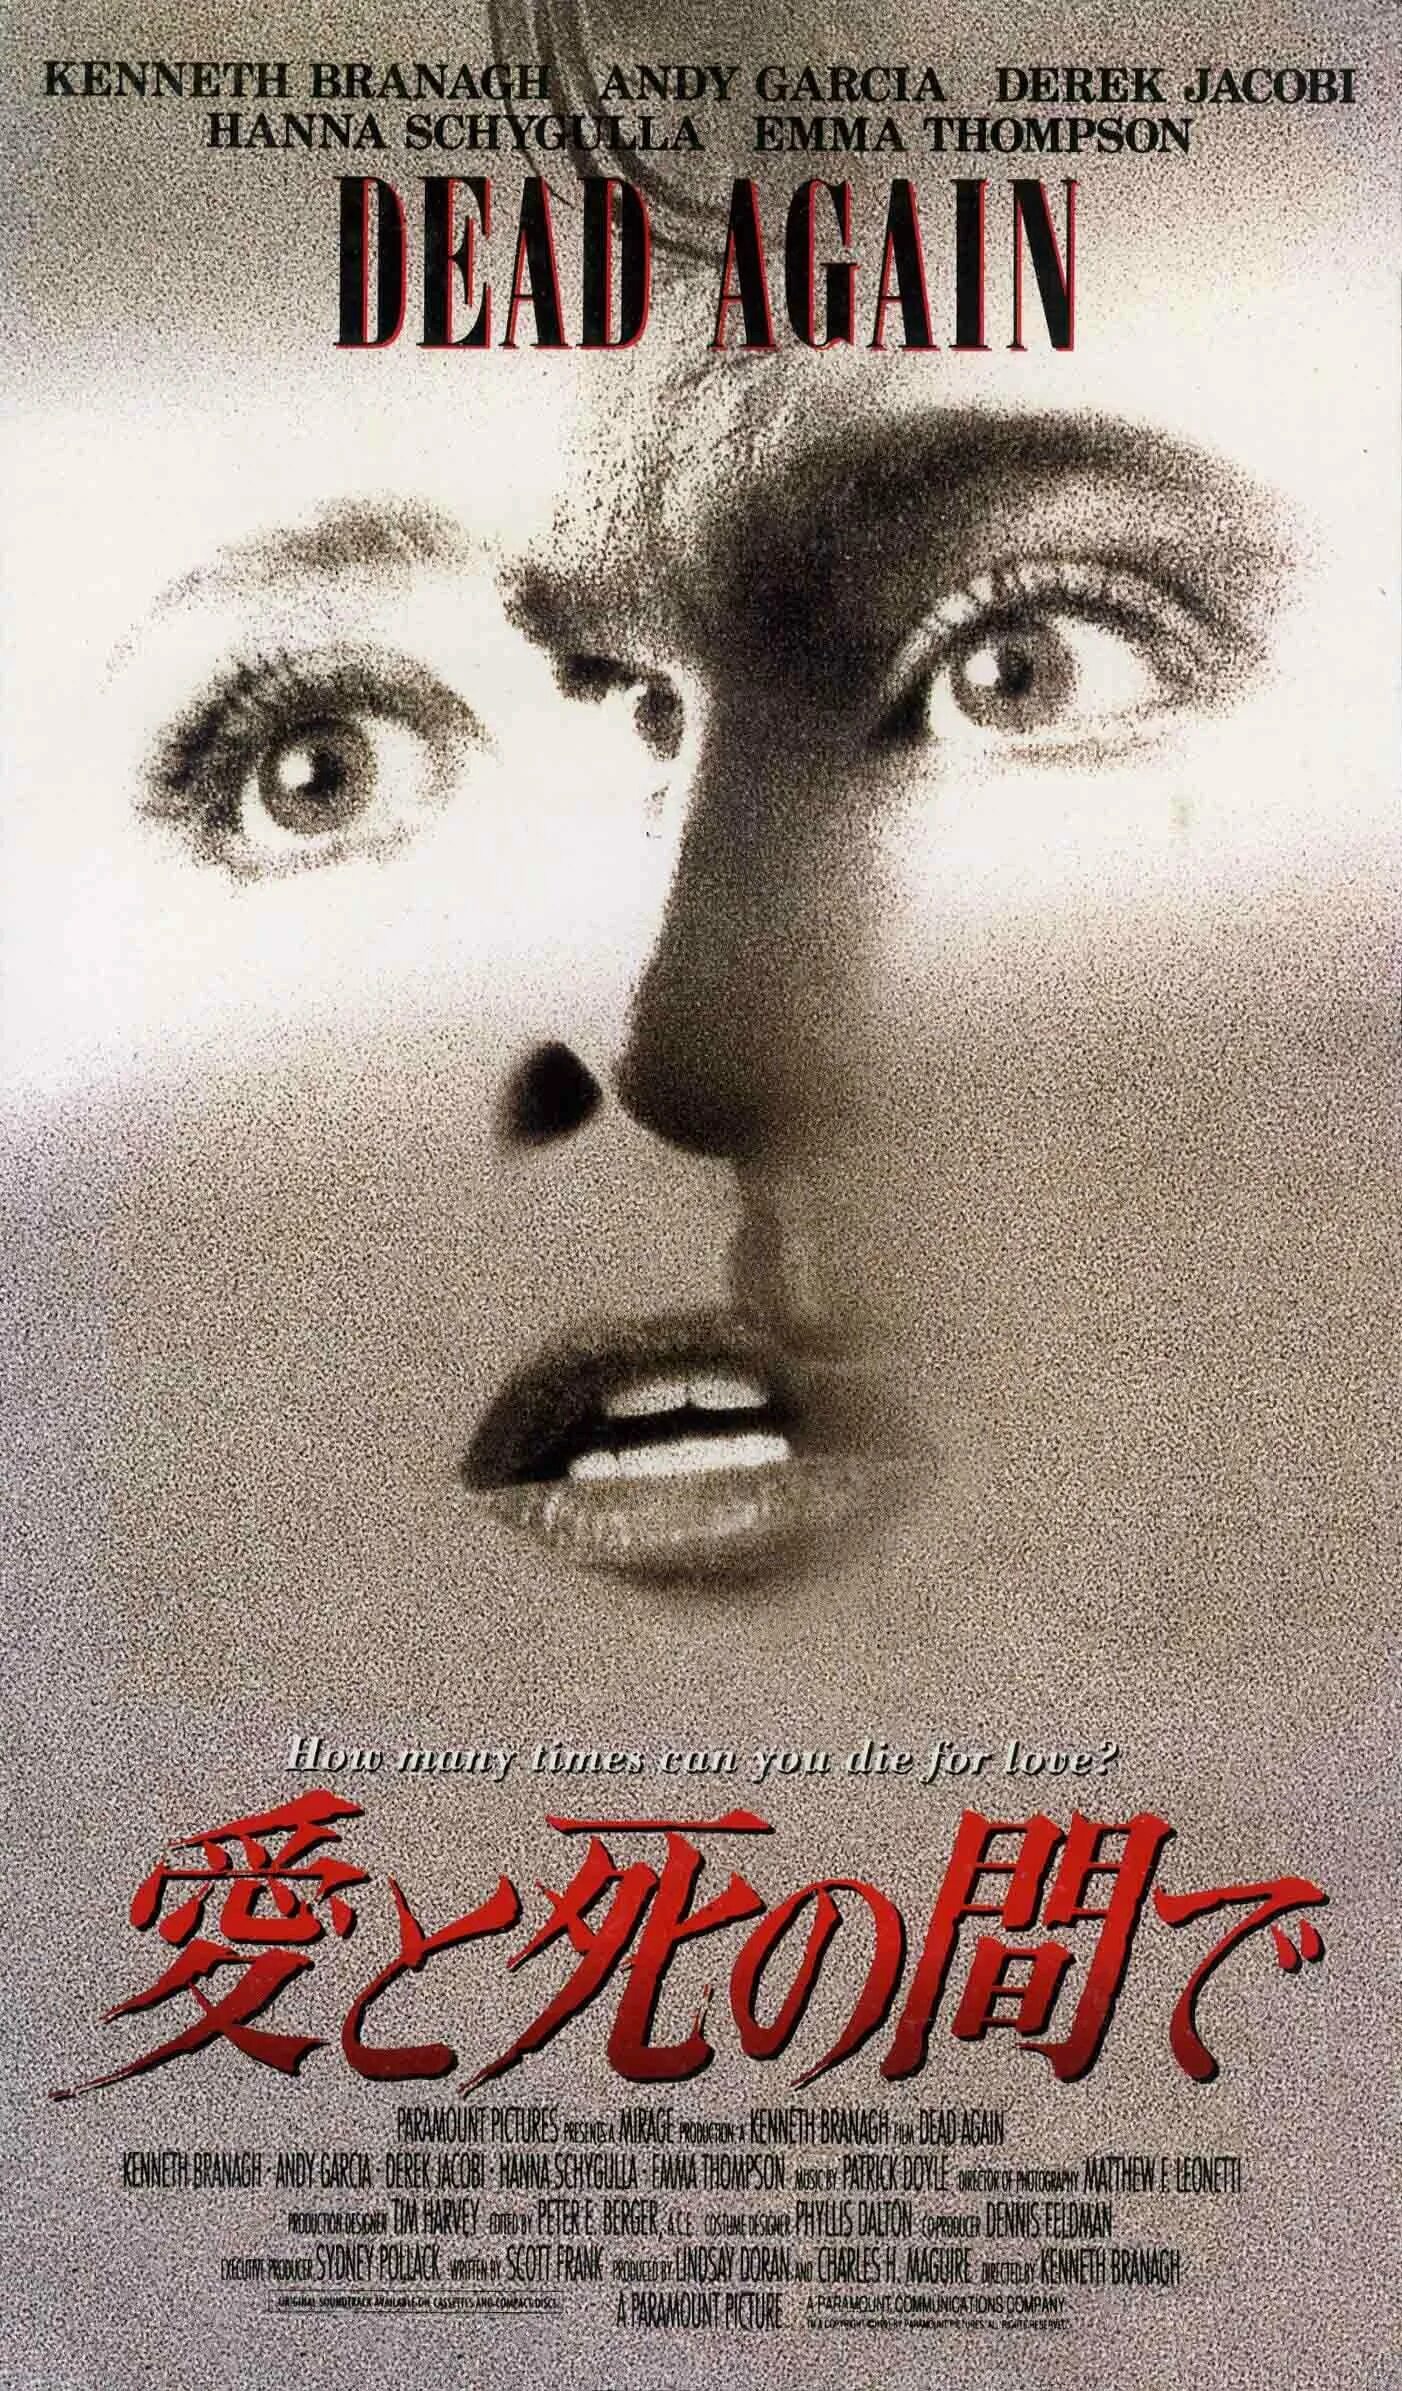 Dead again. Dead again 1991. Dead again (1991) poster. Каменные цветы (1991) poster. Dead again is a 1991.